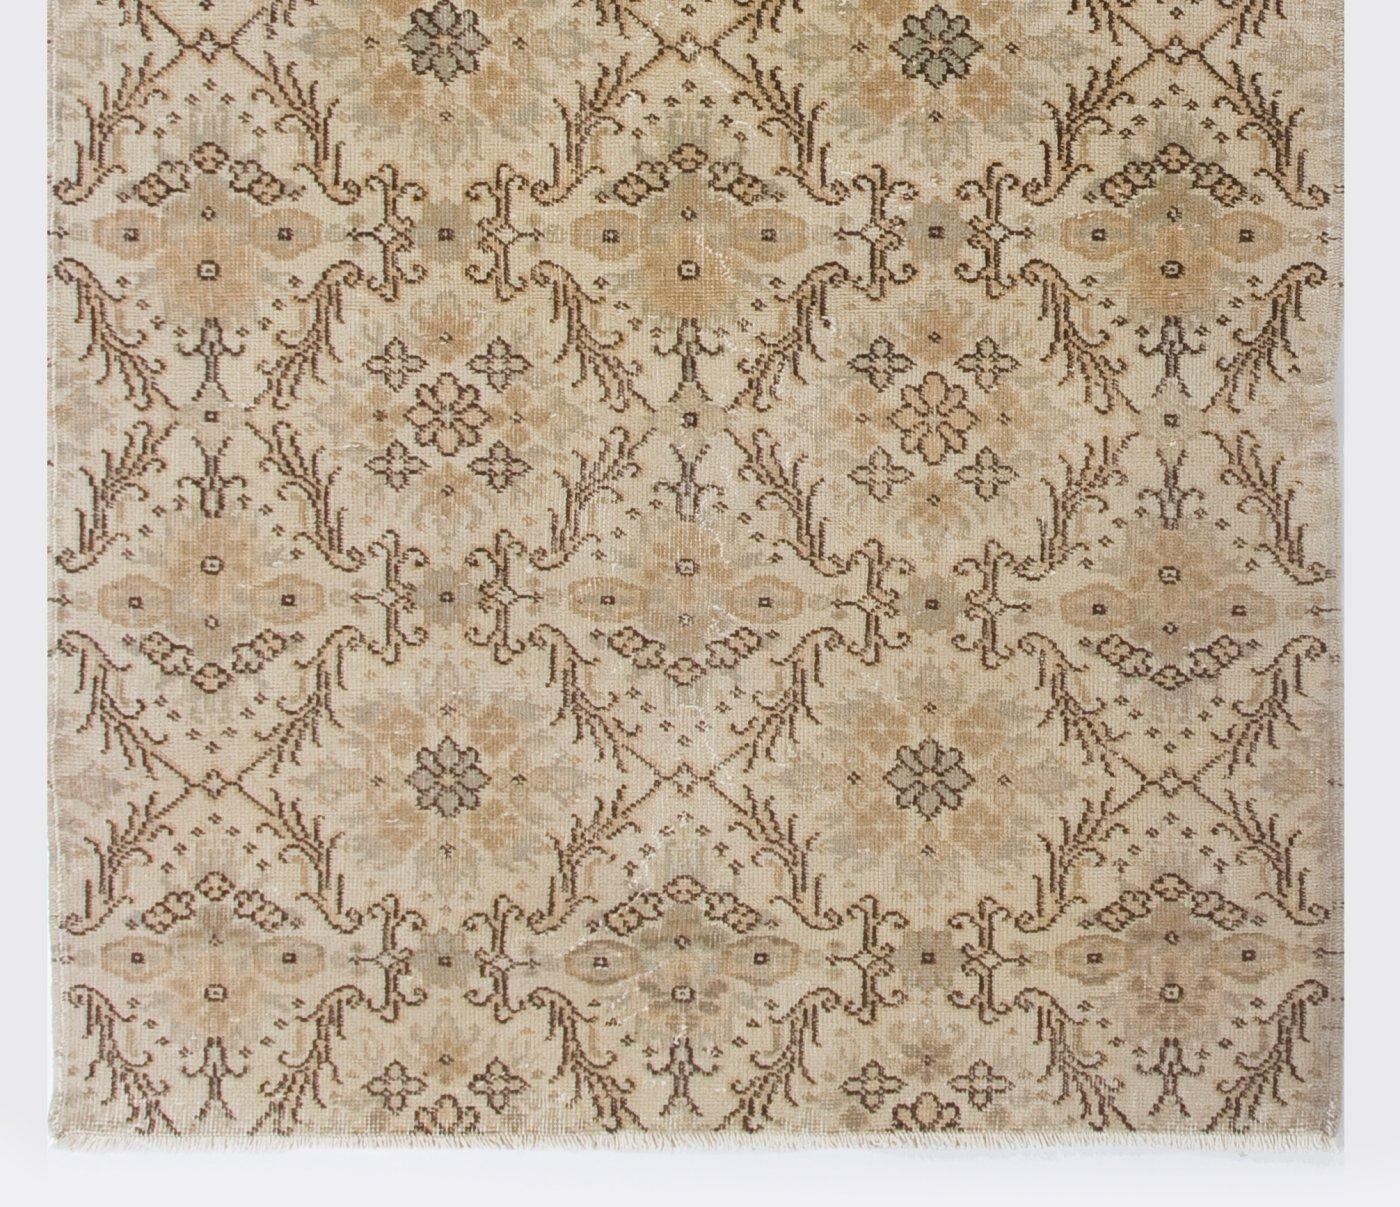 Oushak 4.2x7.5 ft Decorative Vintage Handmade Anatolian Accent Rug with Floral Design For Sale